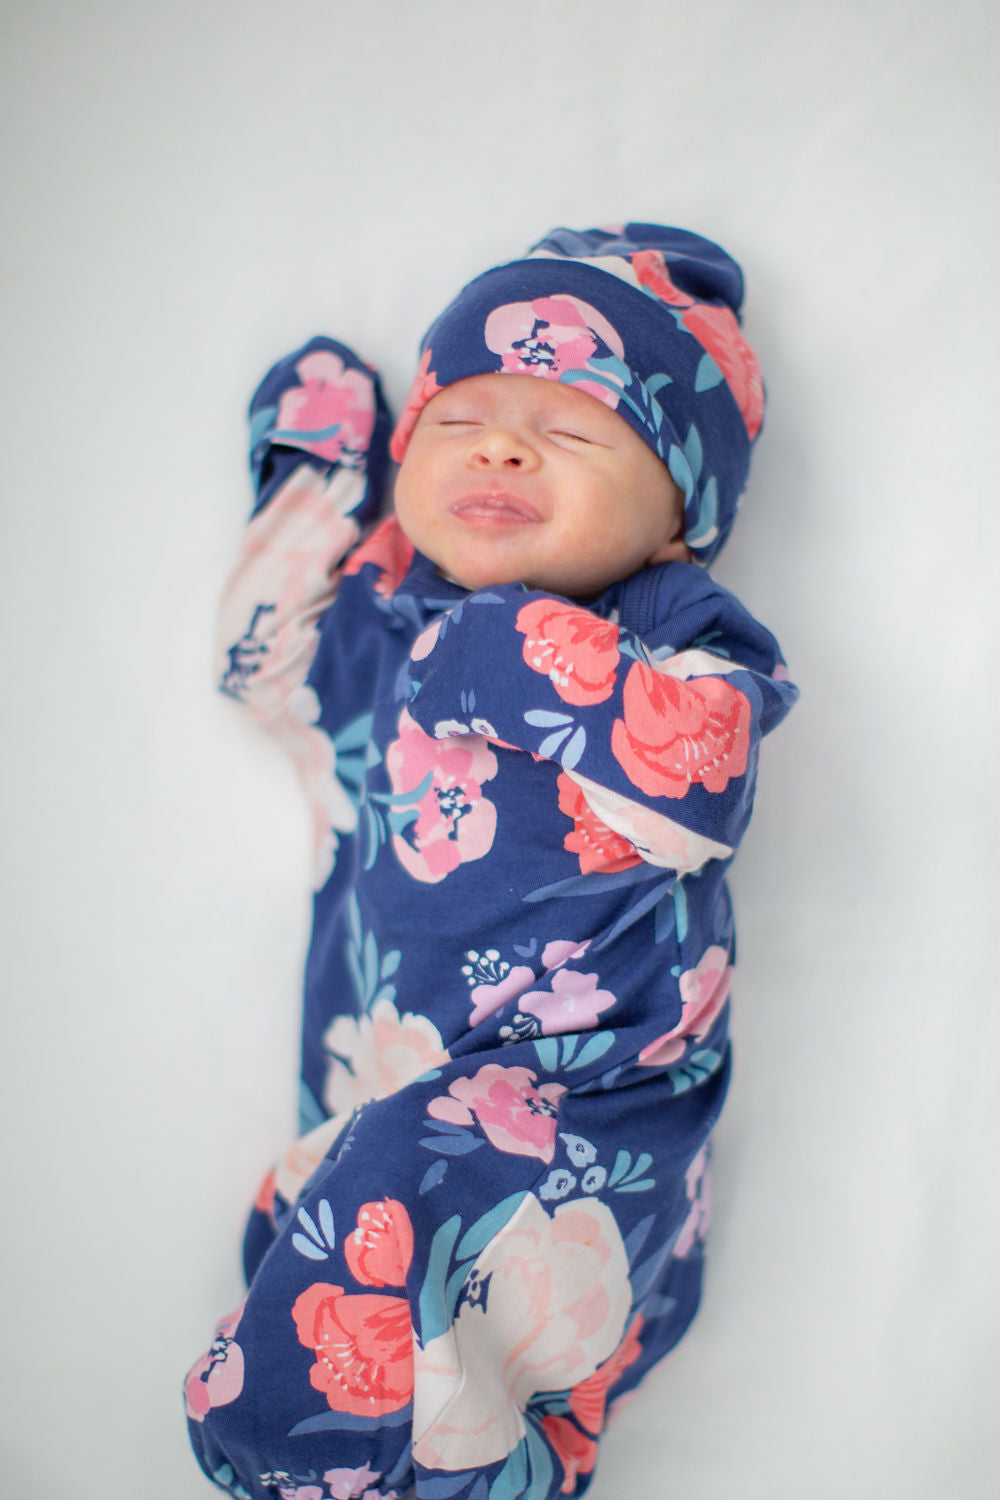 Annabelle printed baby gown and hat. Cream and pink flowers against a navy background.